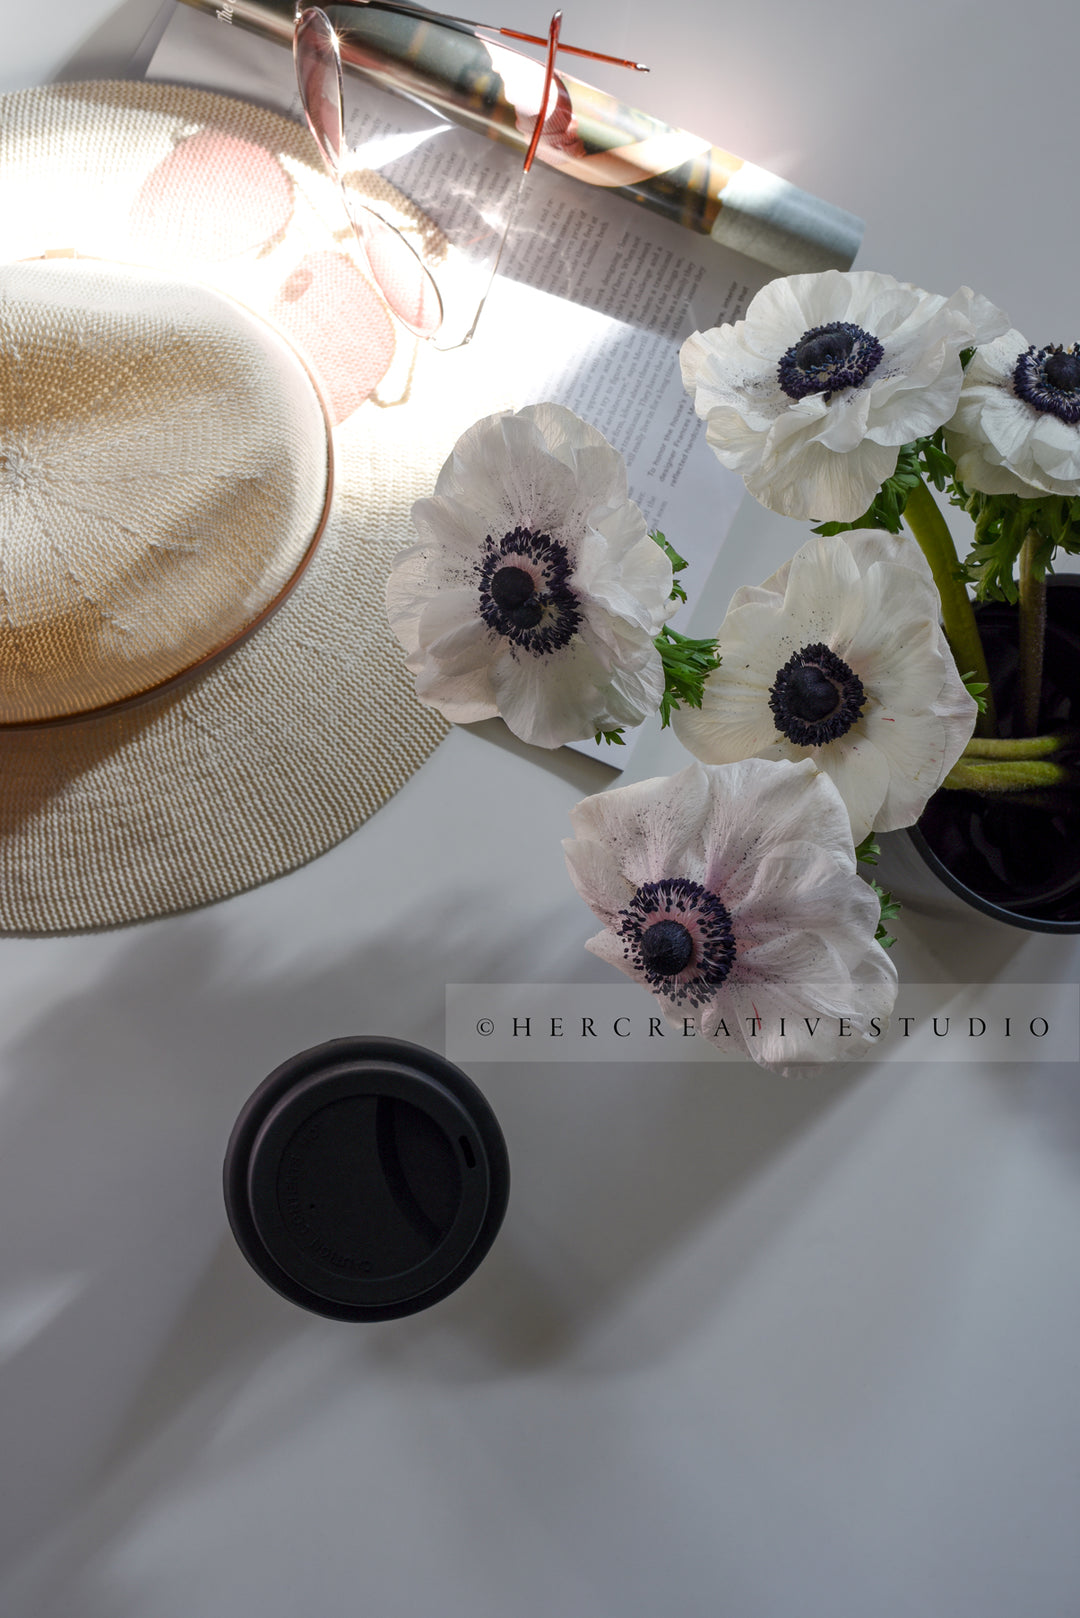 Panama Hat, Coffee & Anemone in Sunlight, Styled Image